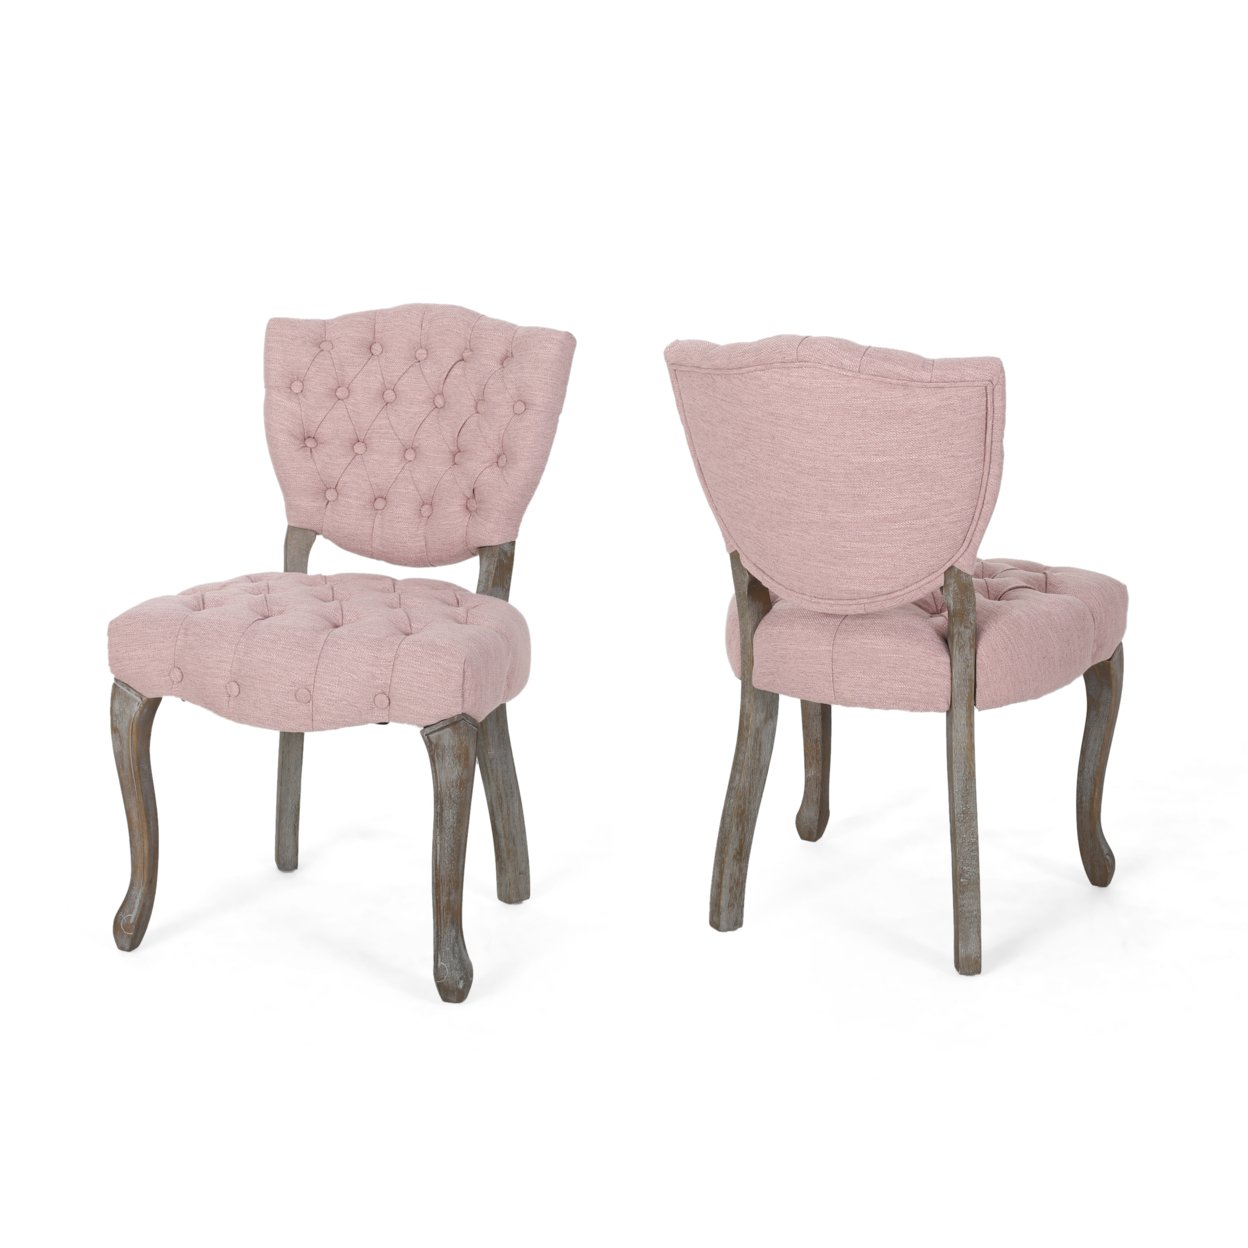 Case Tufted Dining Chair With Cabriole Legs (Set Of 2) - Light Blush + Brown Wash Finish